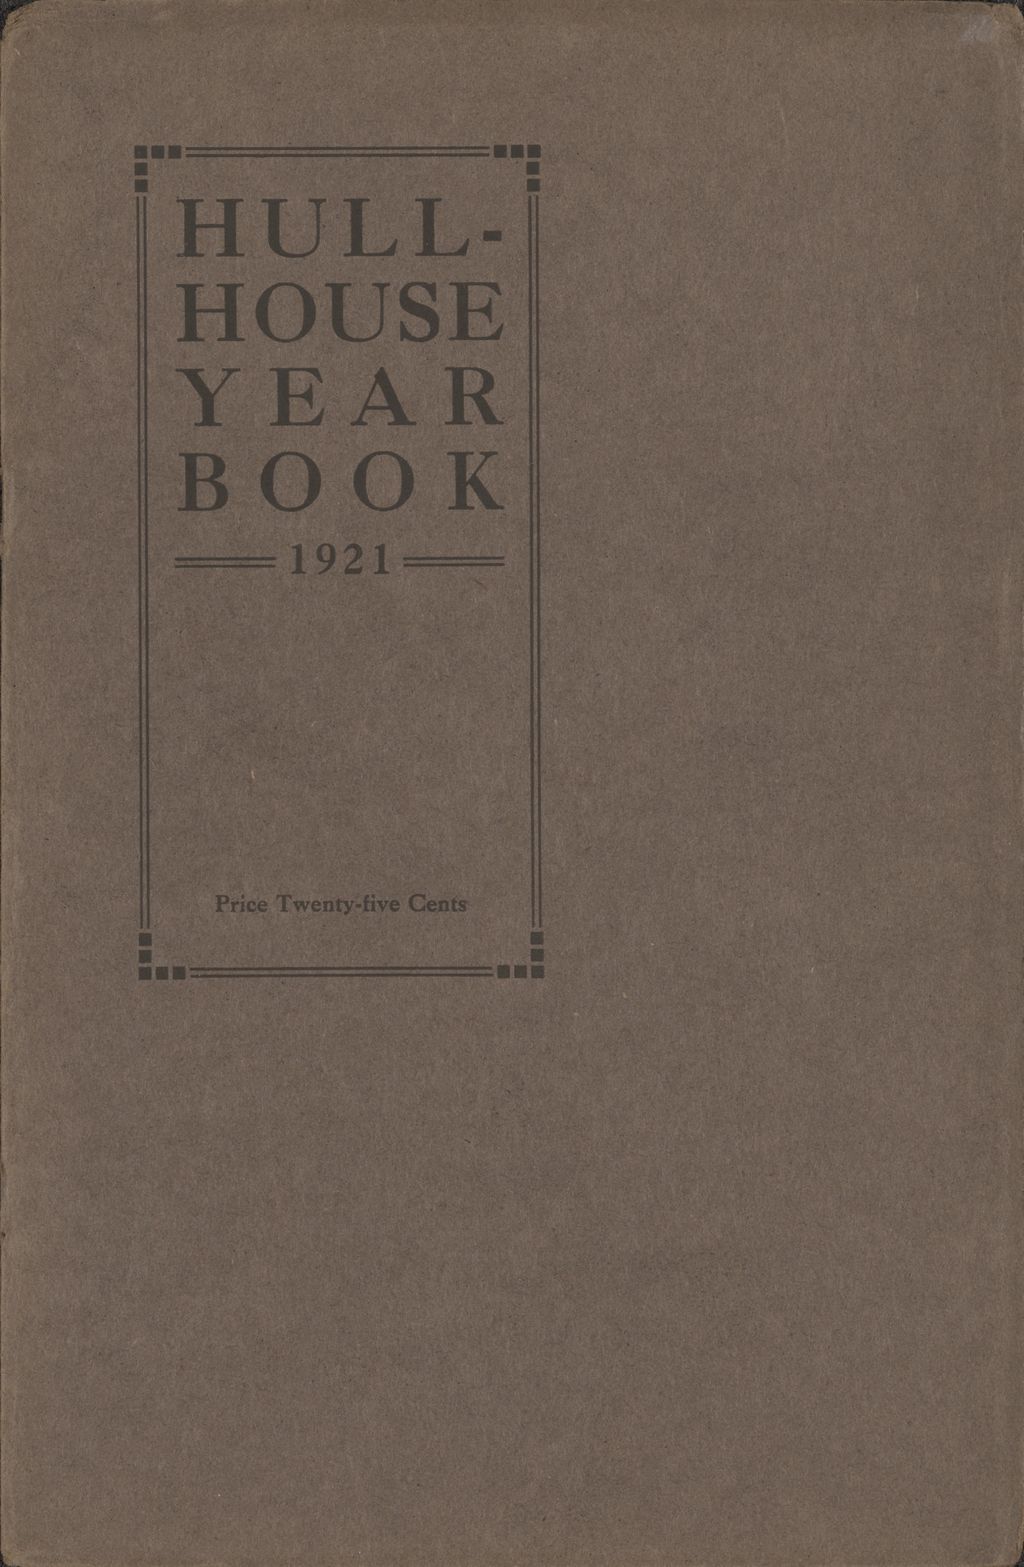 Miniature of Hull-House Year Book, 1921